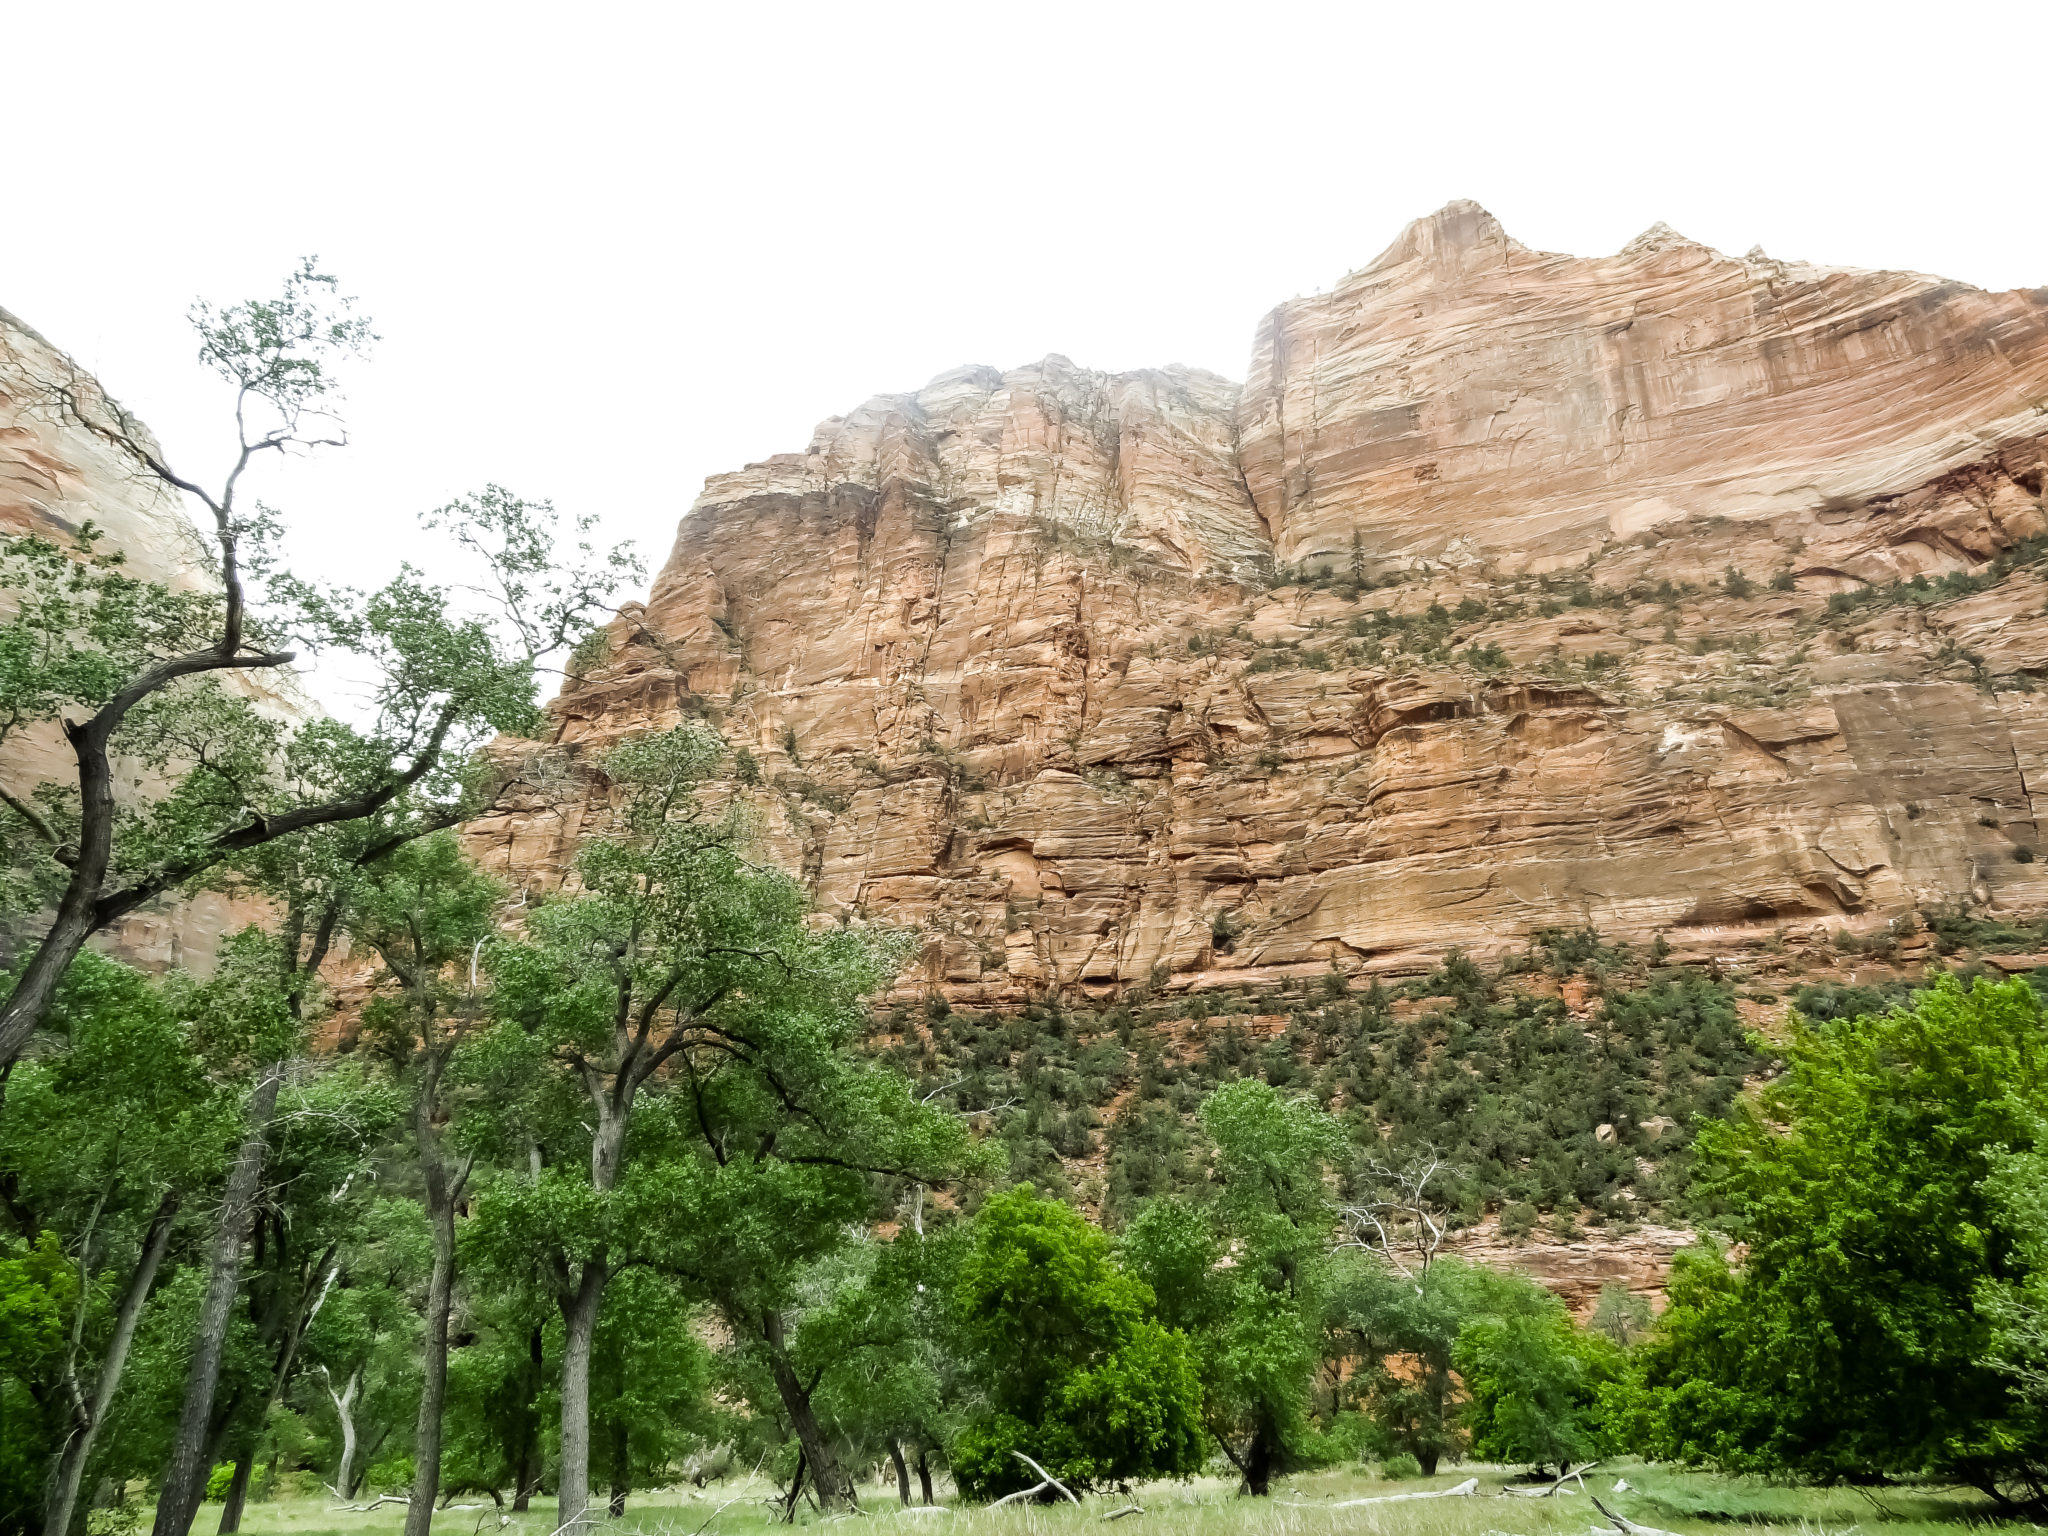 A view from the Grotto Trail at Zion National Park.